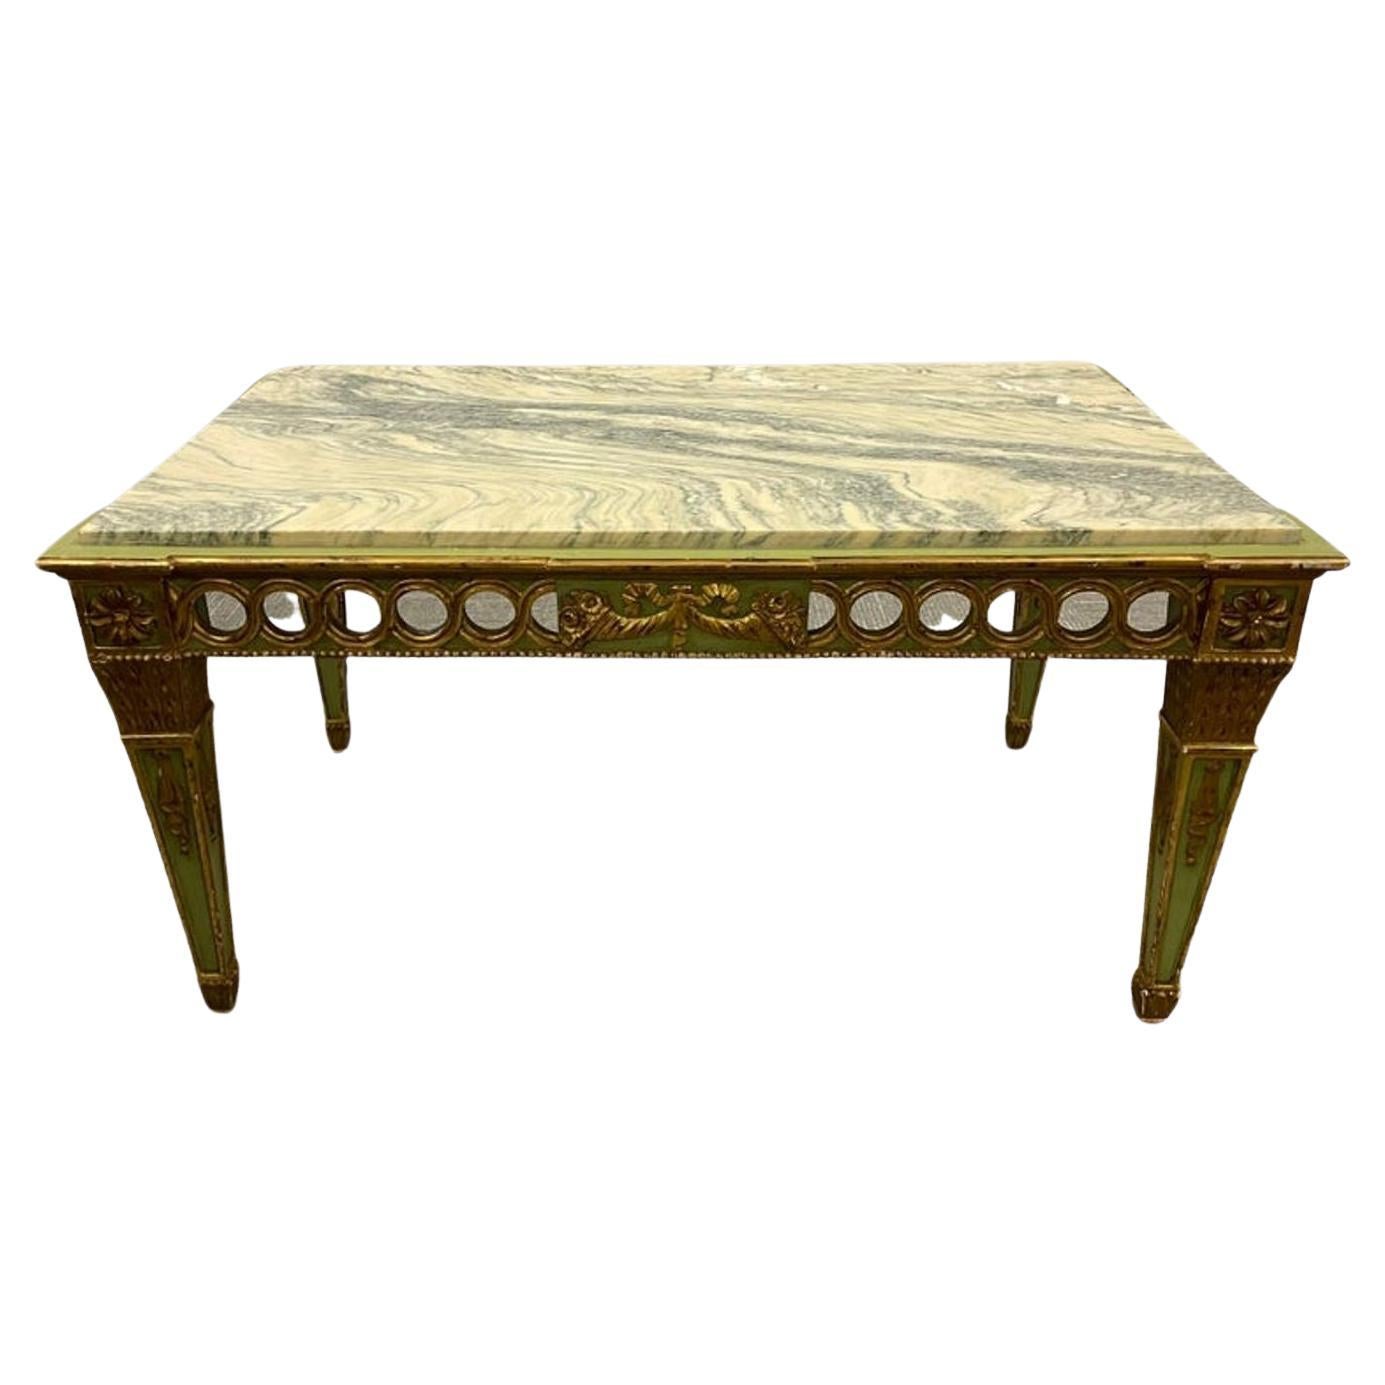 Hollywood Regency Coffee Table by Maison Jansen. Marble Top. Painted.